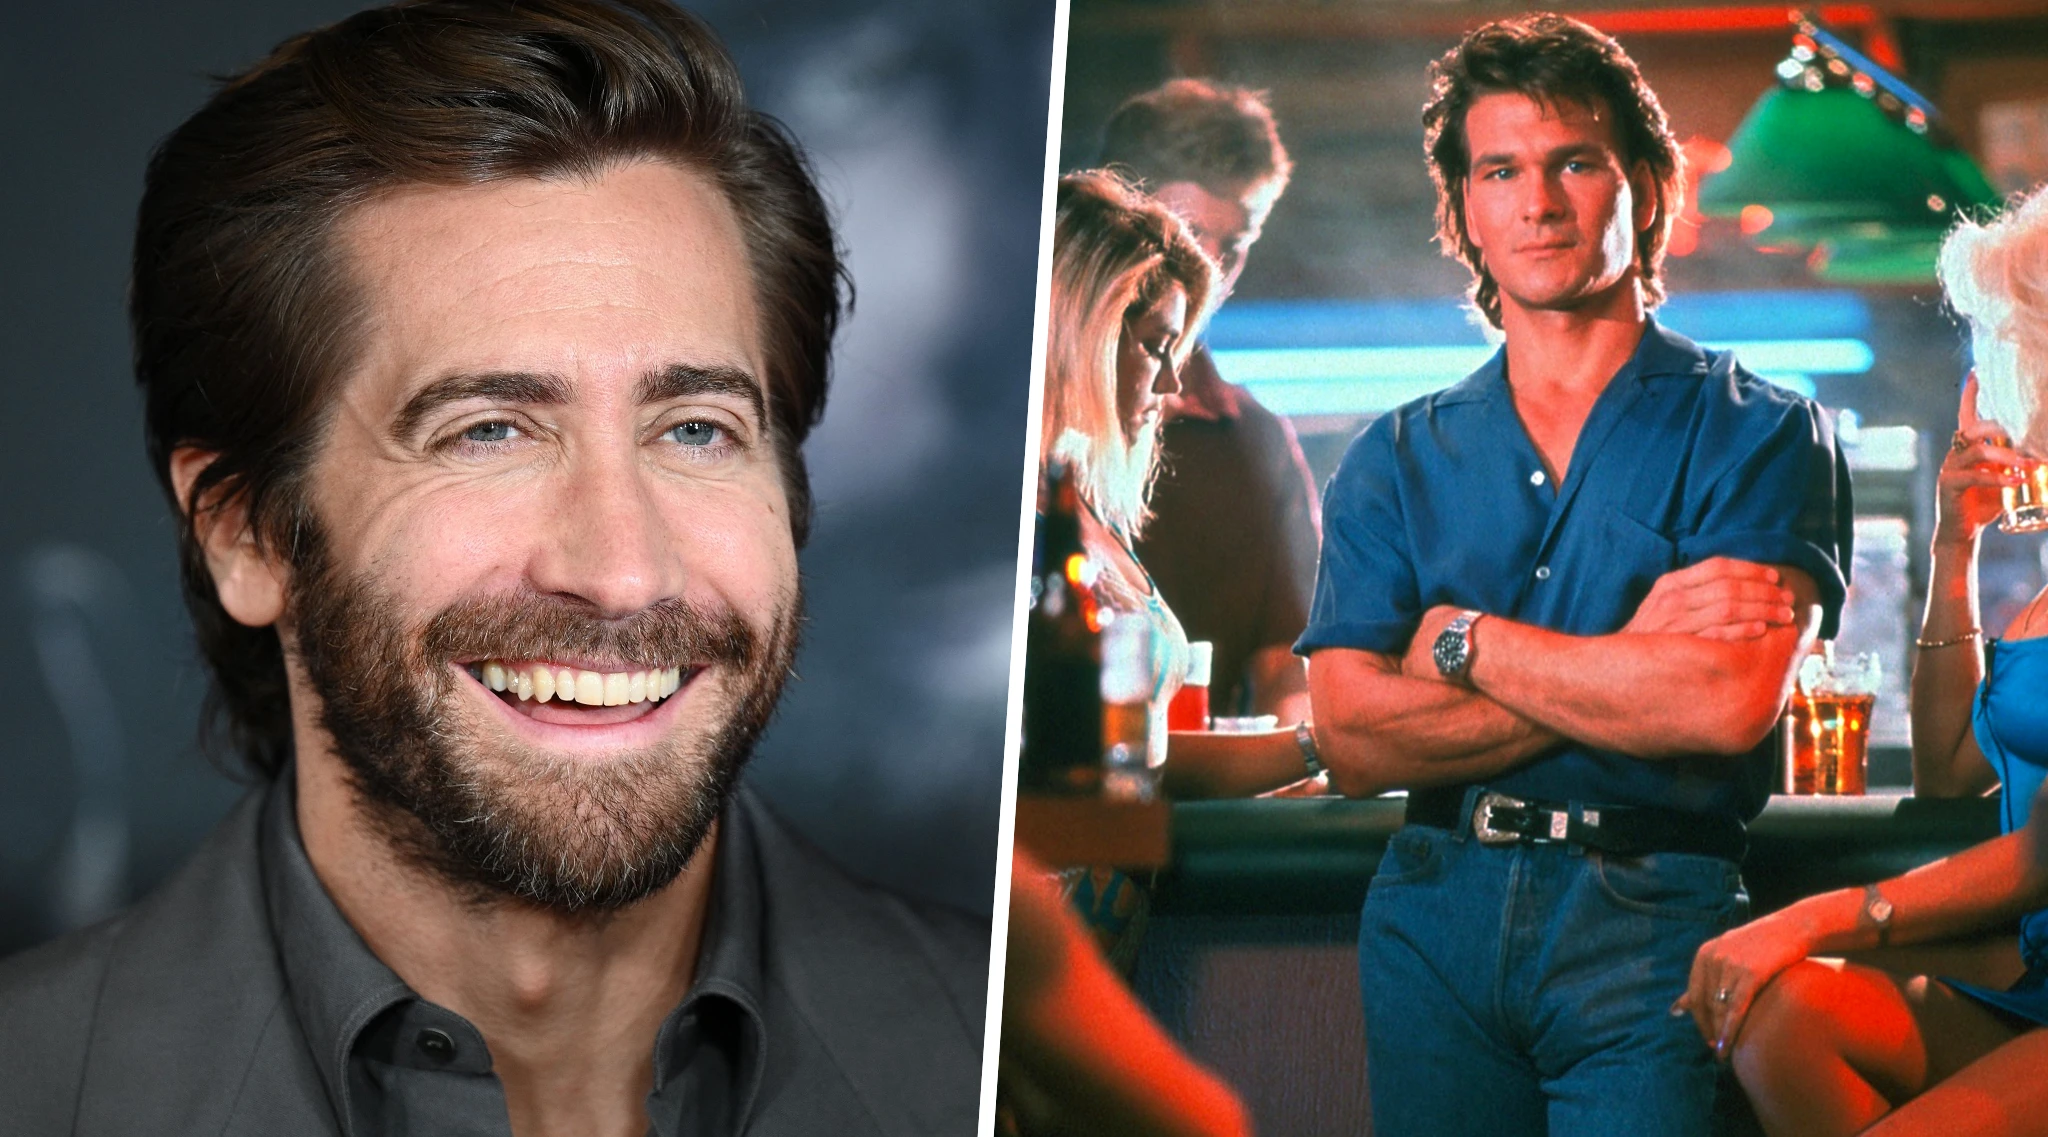 Jake Gyllenhaal Will Take on Patrick Swayze's Iconic Role in 'Road House' Remake